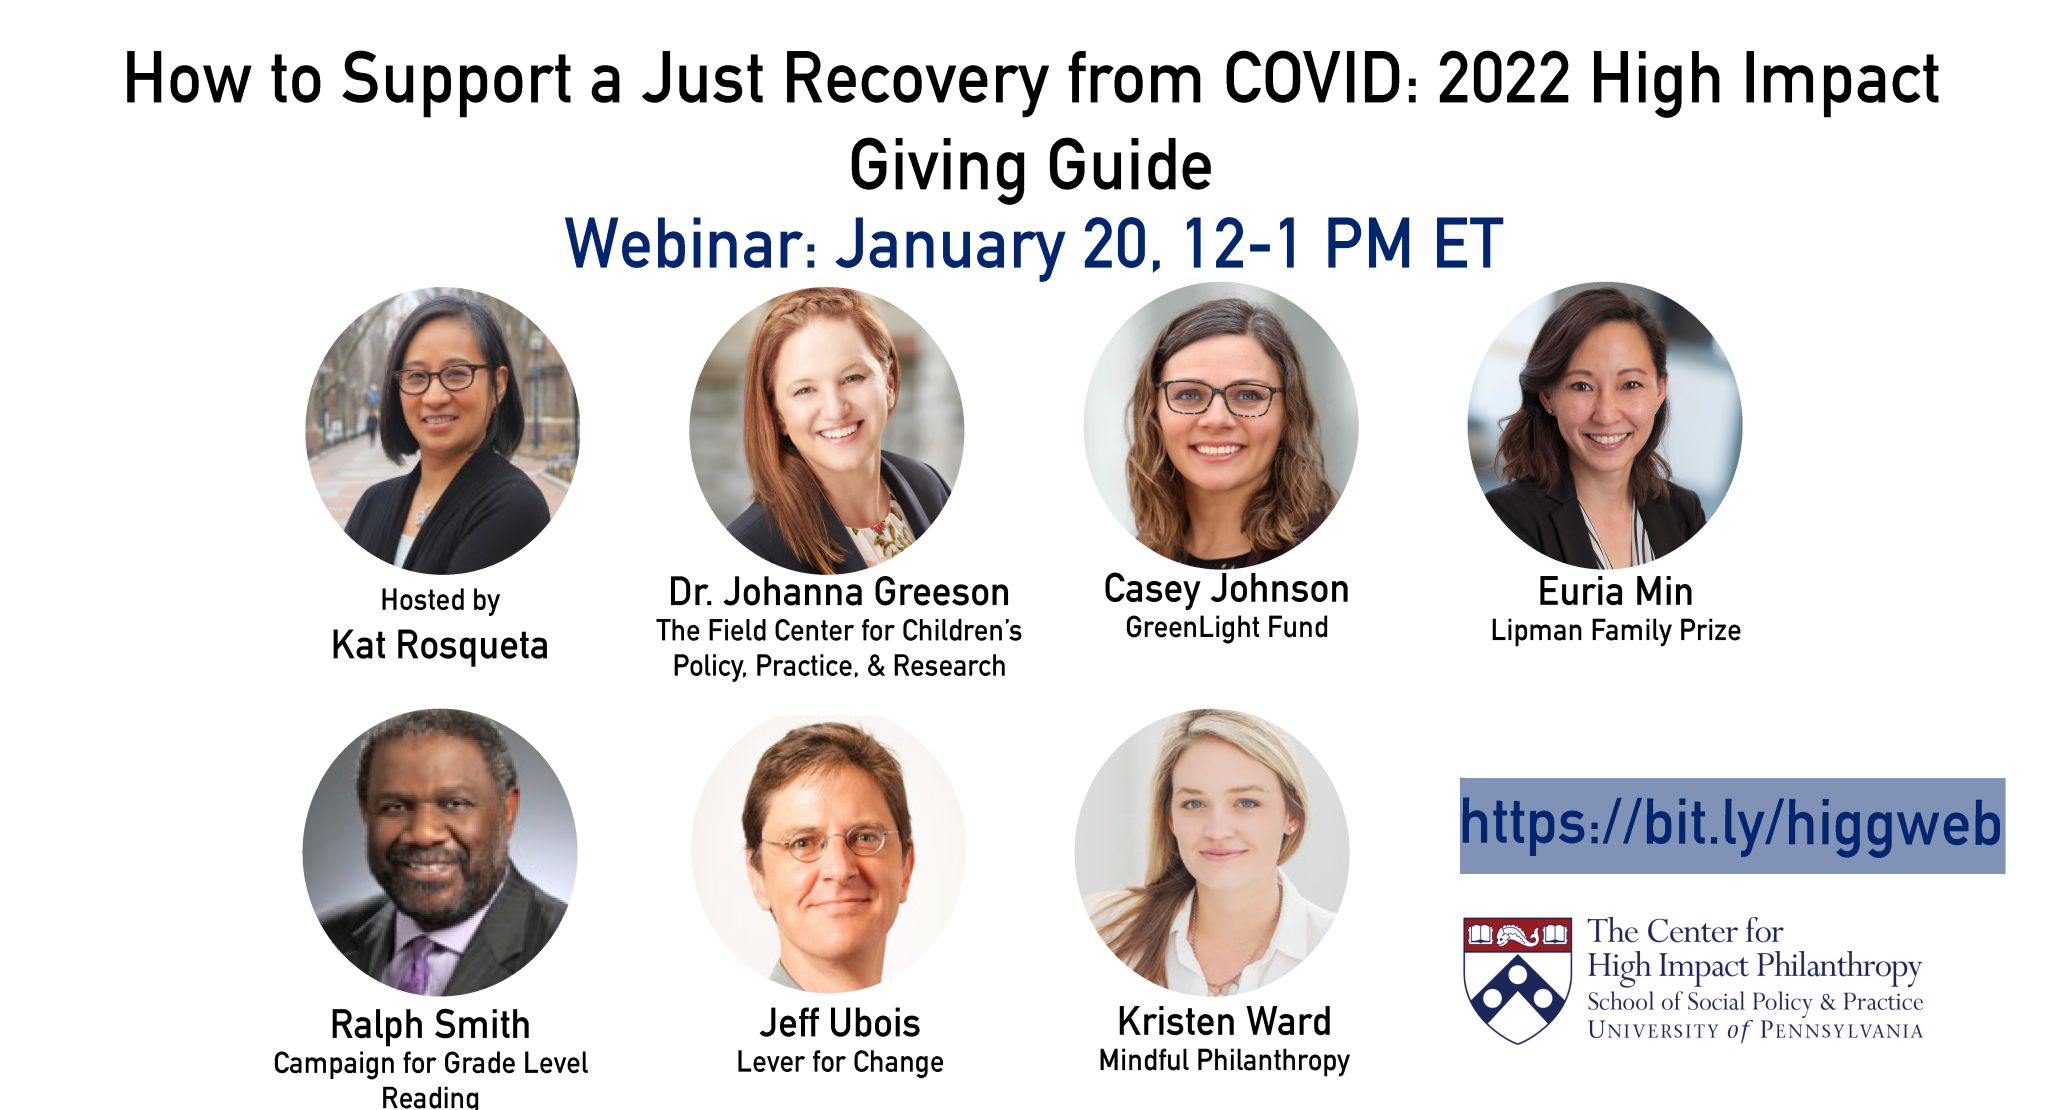 Webinar: 2022 High Impact Giving Guide Launch: How to Support a Just Recovery from COVID